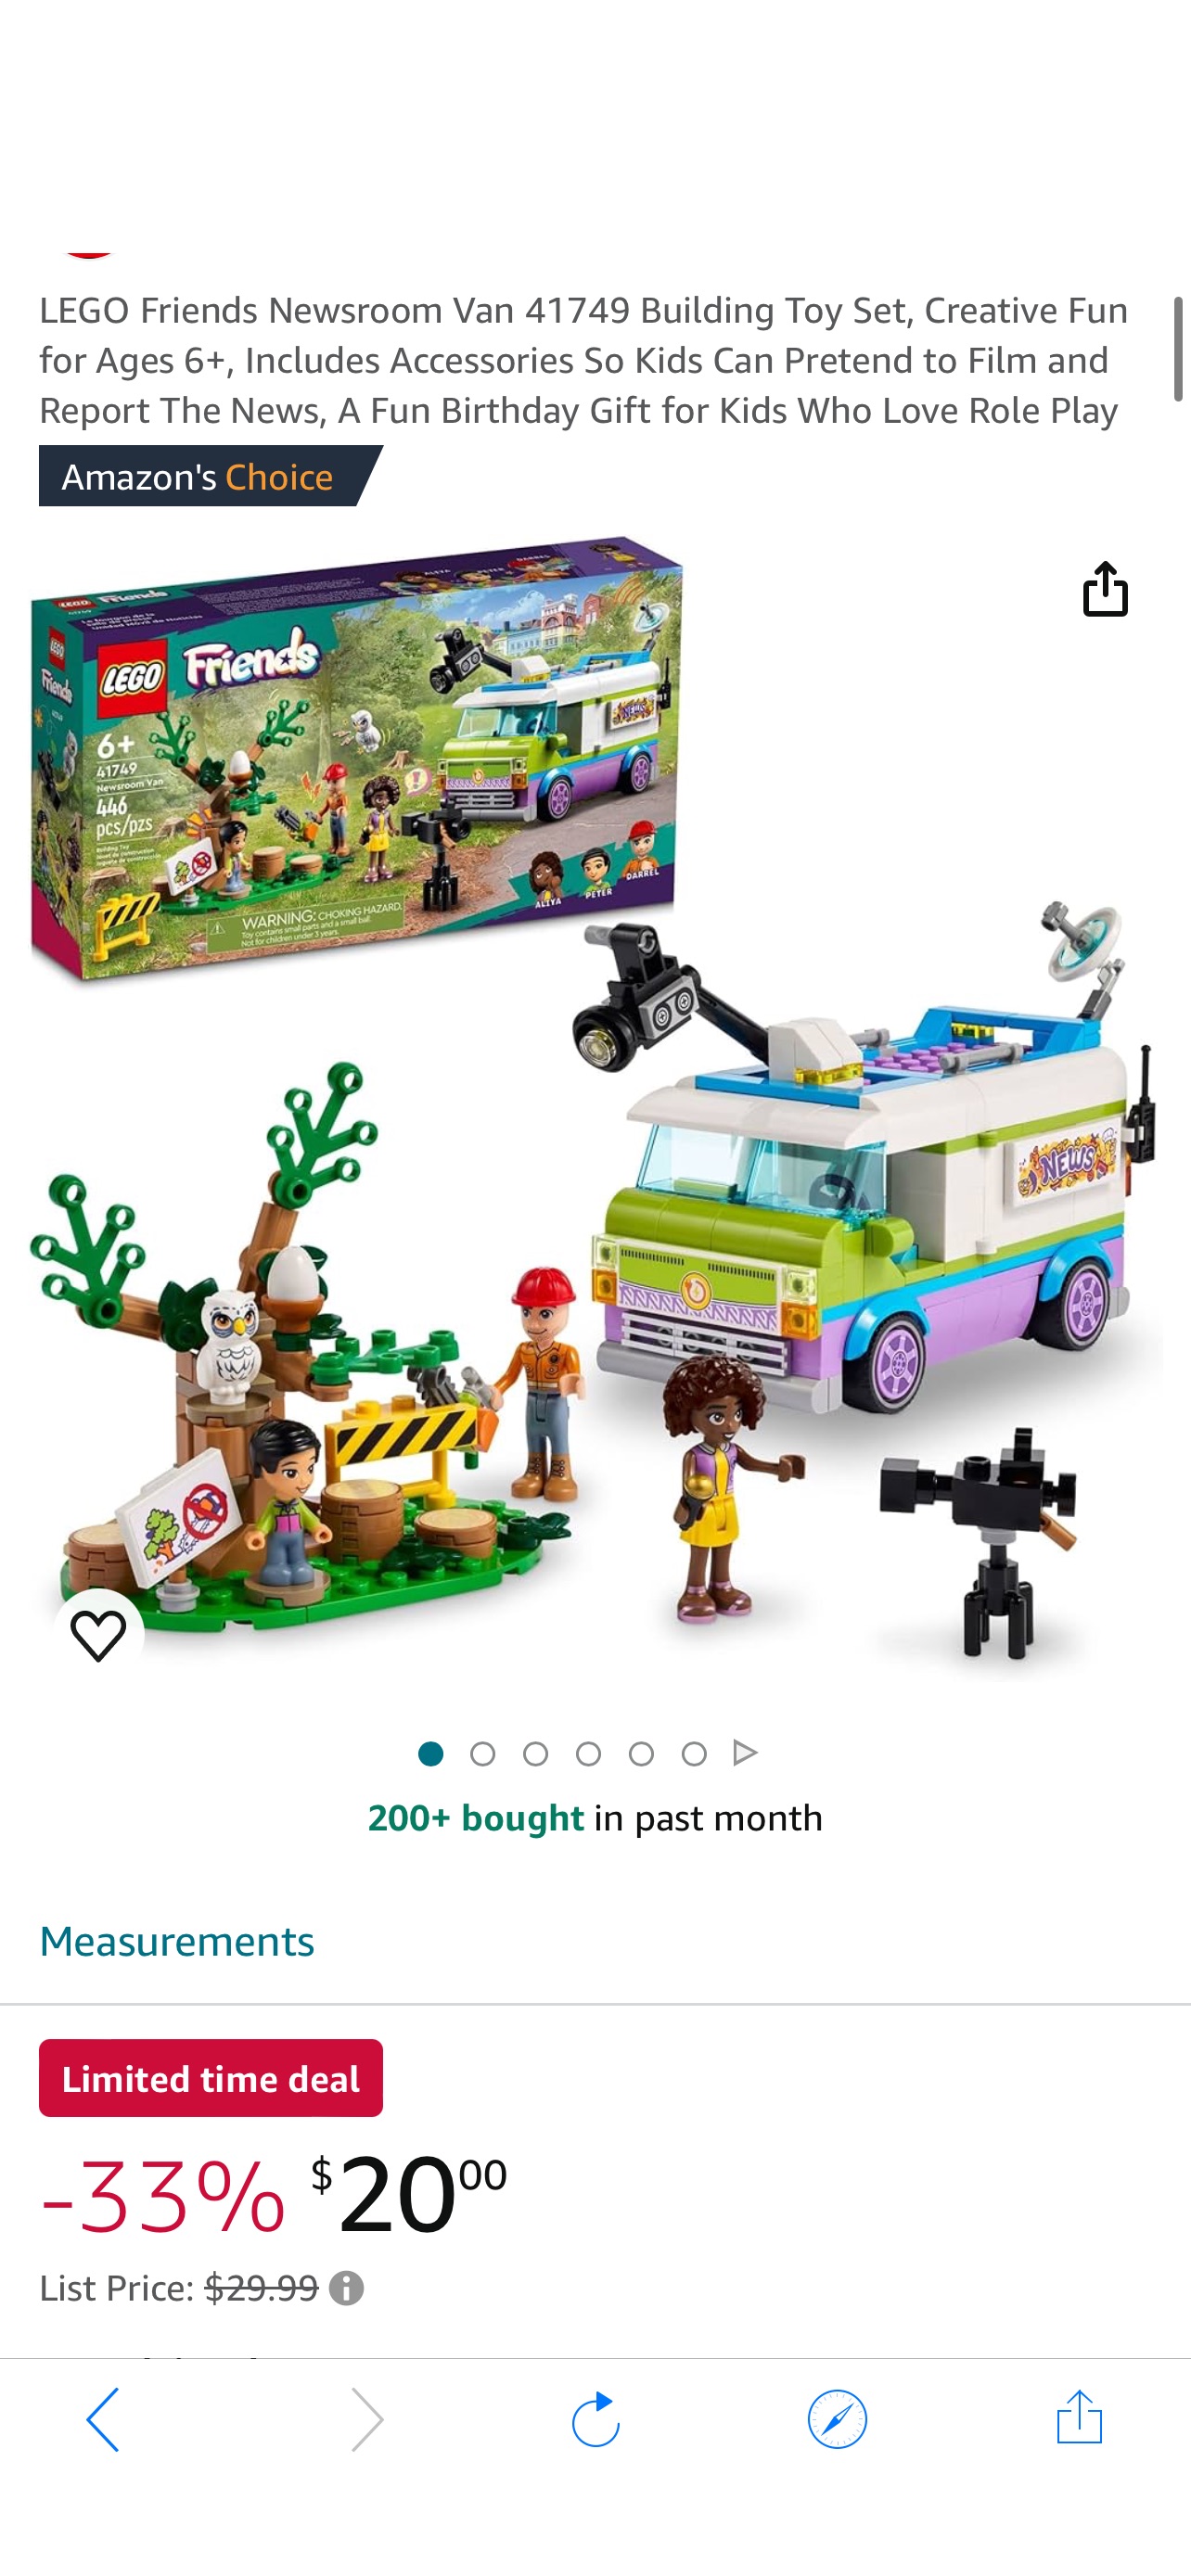 Amazon.com: LEGO Friends Newsroom Van 41749 Building Toy Set, Creative Fun for Ages 6+, Includes Accessories So Kids Can Pretend to Film and Report 乐高好朋友新闻车